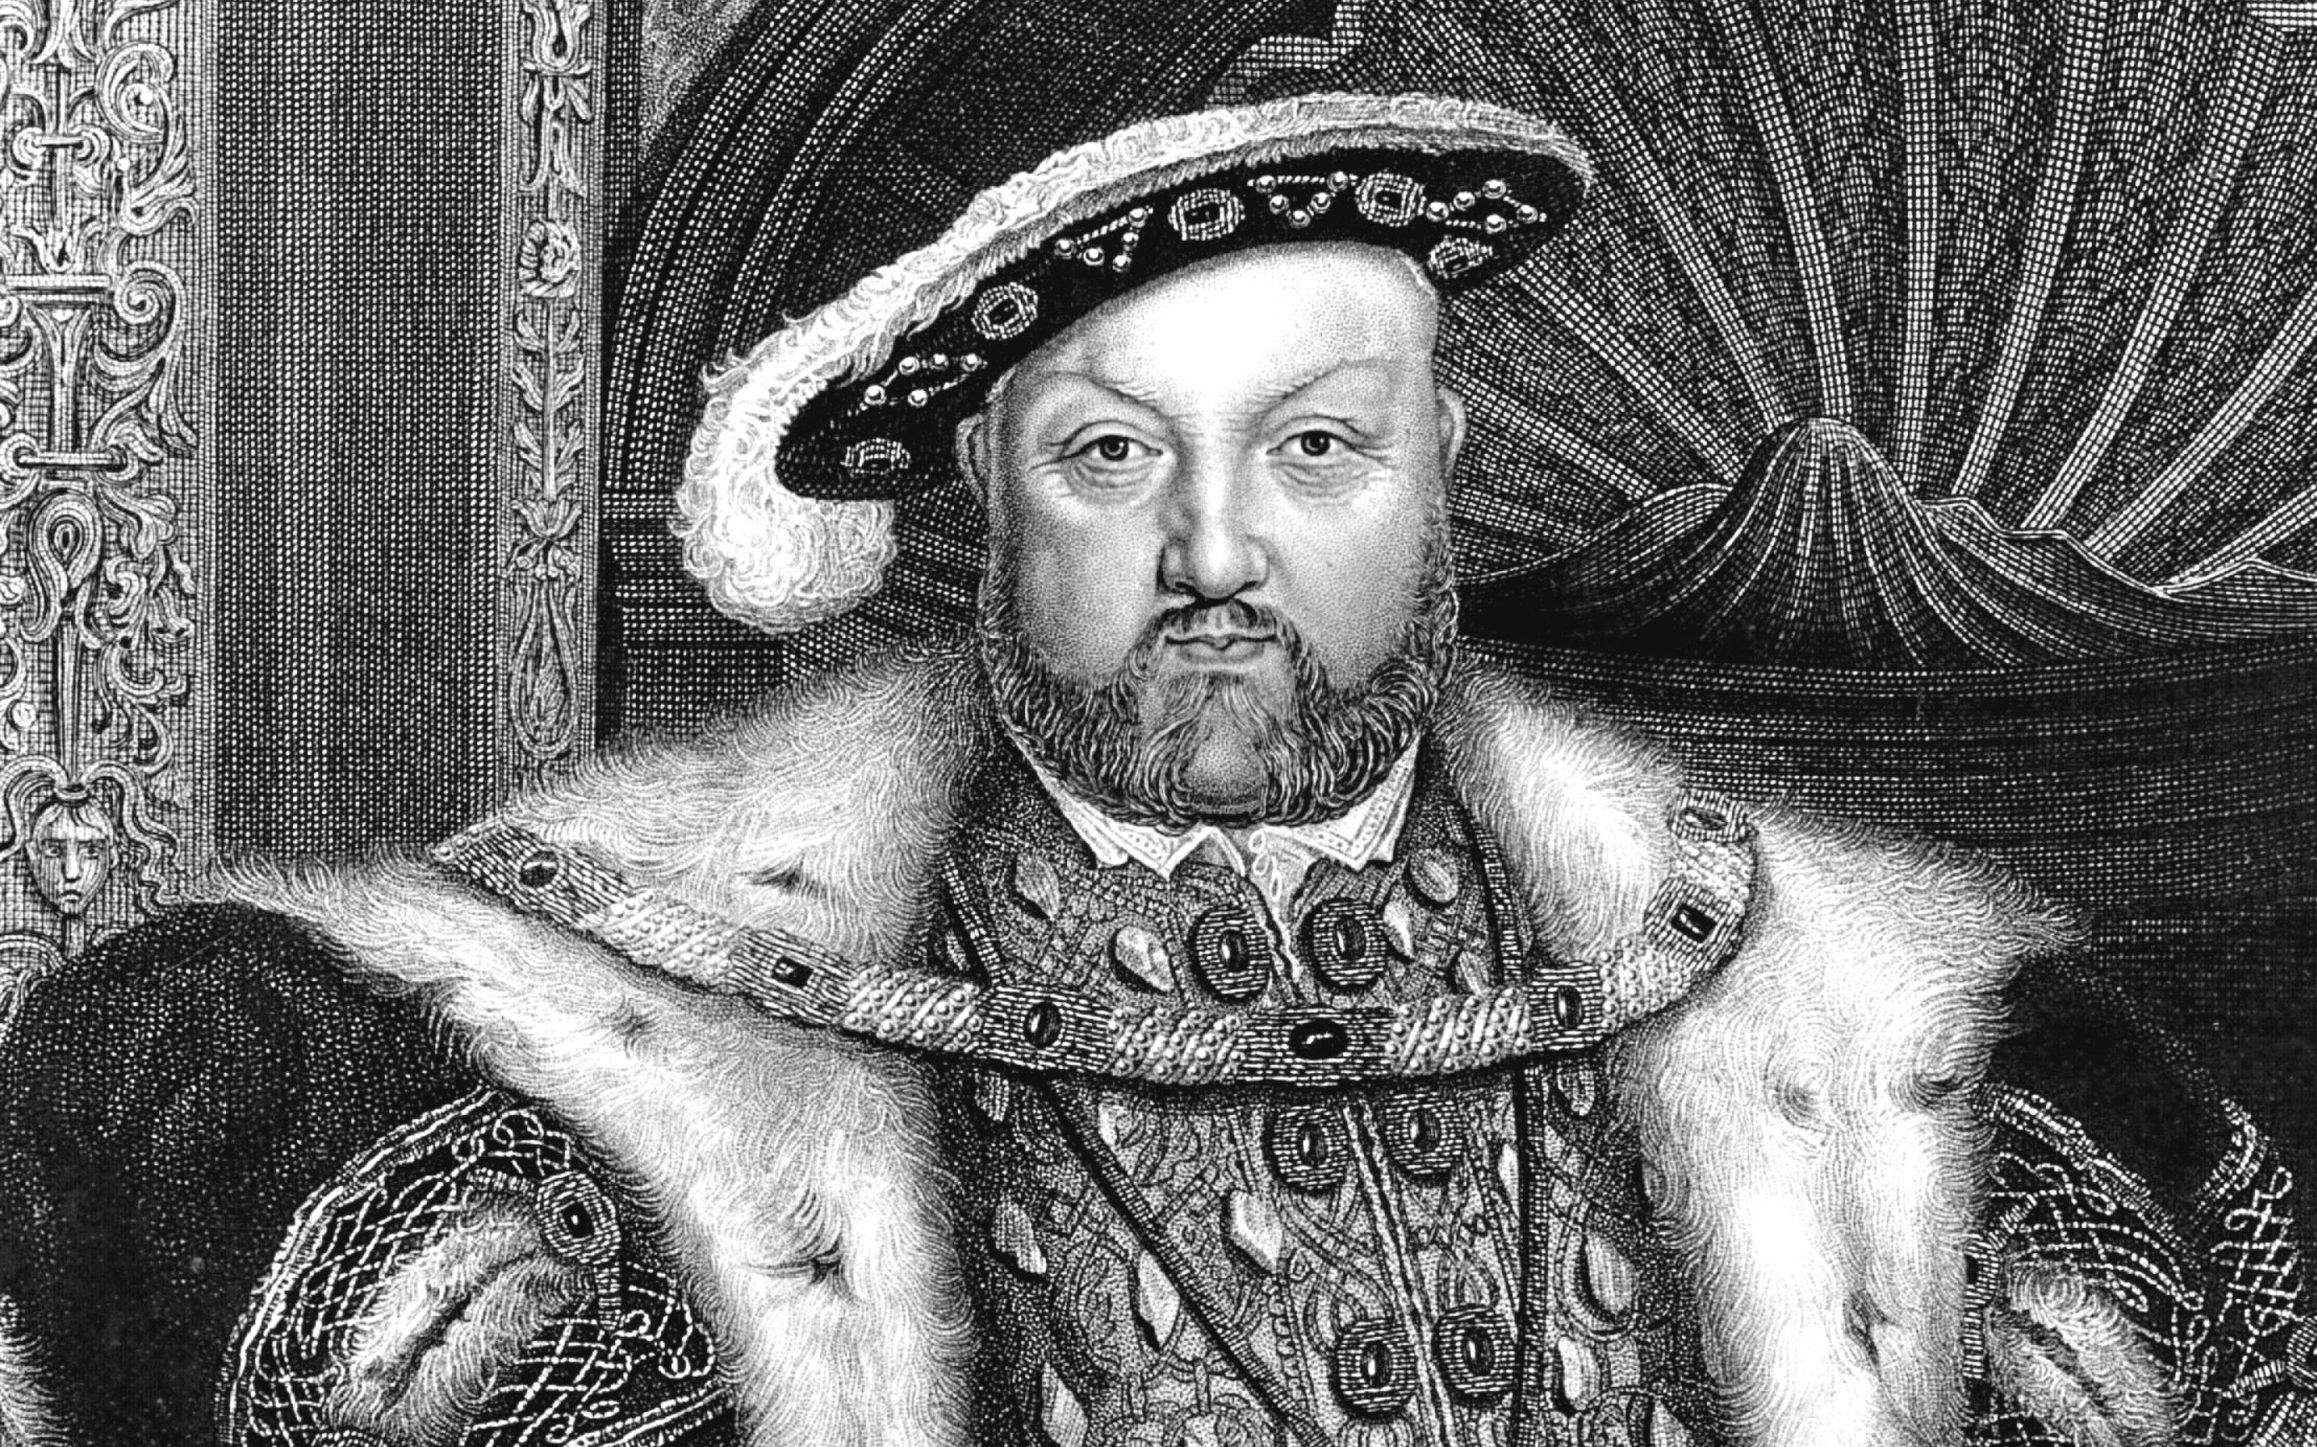 A portrait of King Henry VIII (Hulton Archive/Getty Images)